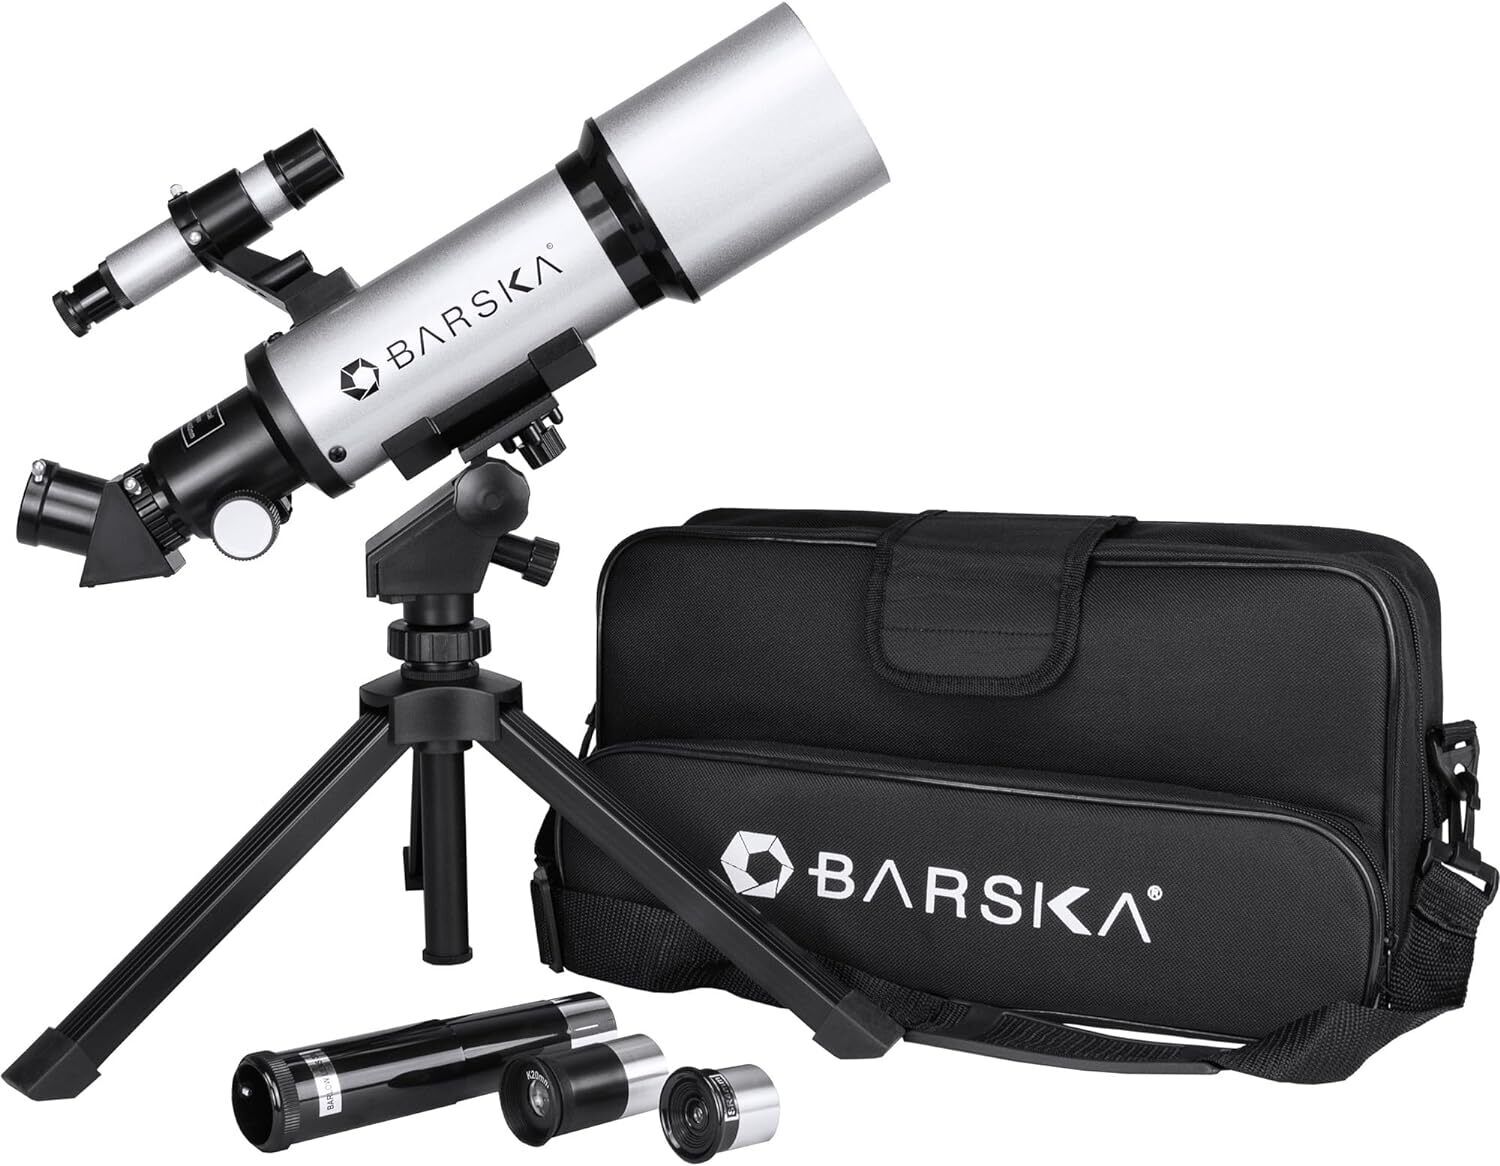 Astronomical Refractor Telescope 300x Magnification with Barlow Lens